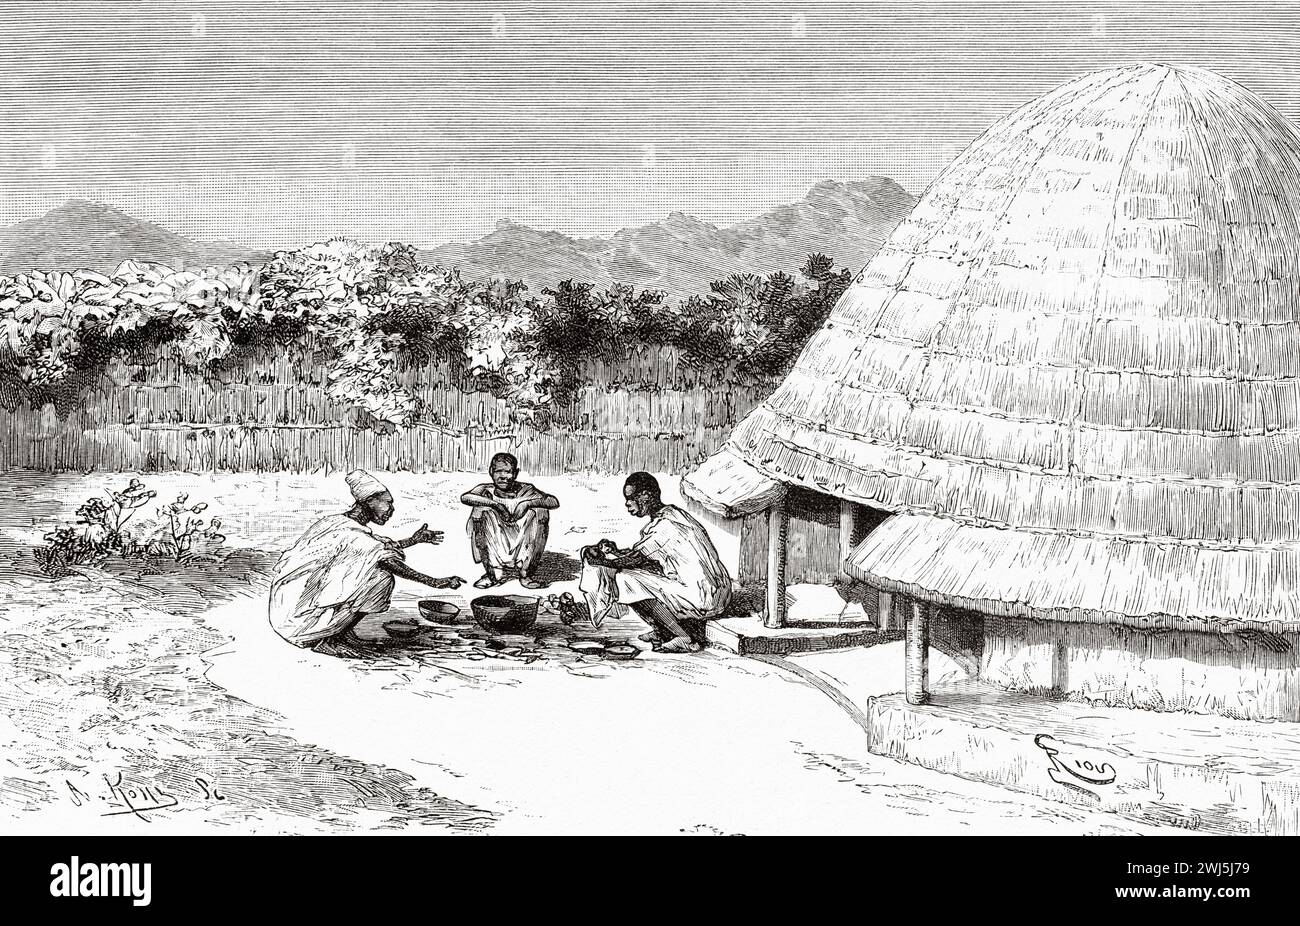 Mission accommodation in Fougoumba, Guinea. Africa. Two campaigns in French Sudan, 1886-1888 by Joseph Simon Gallieni (1849 - 1916) Le Tour du Monde 1890 Stock Photo